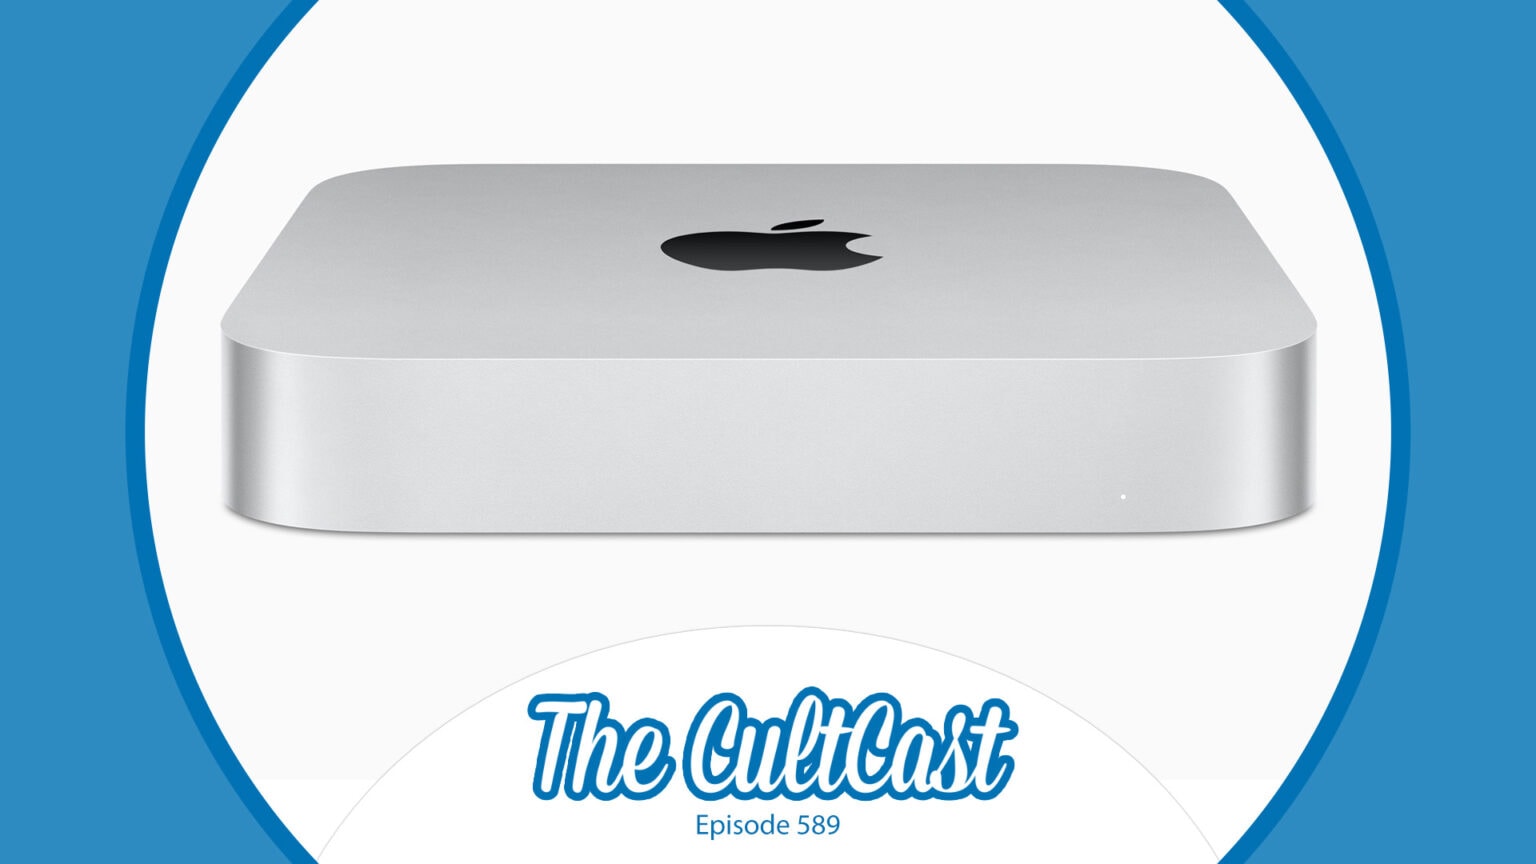 Apple crammed a whole lot of computing power into the Mac mini.